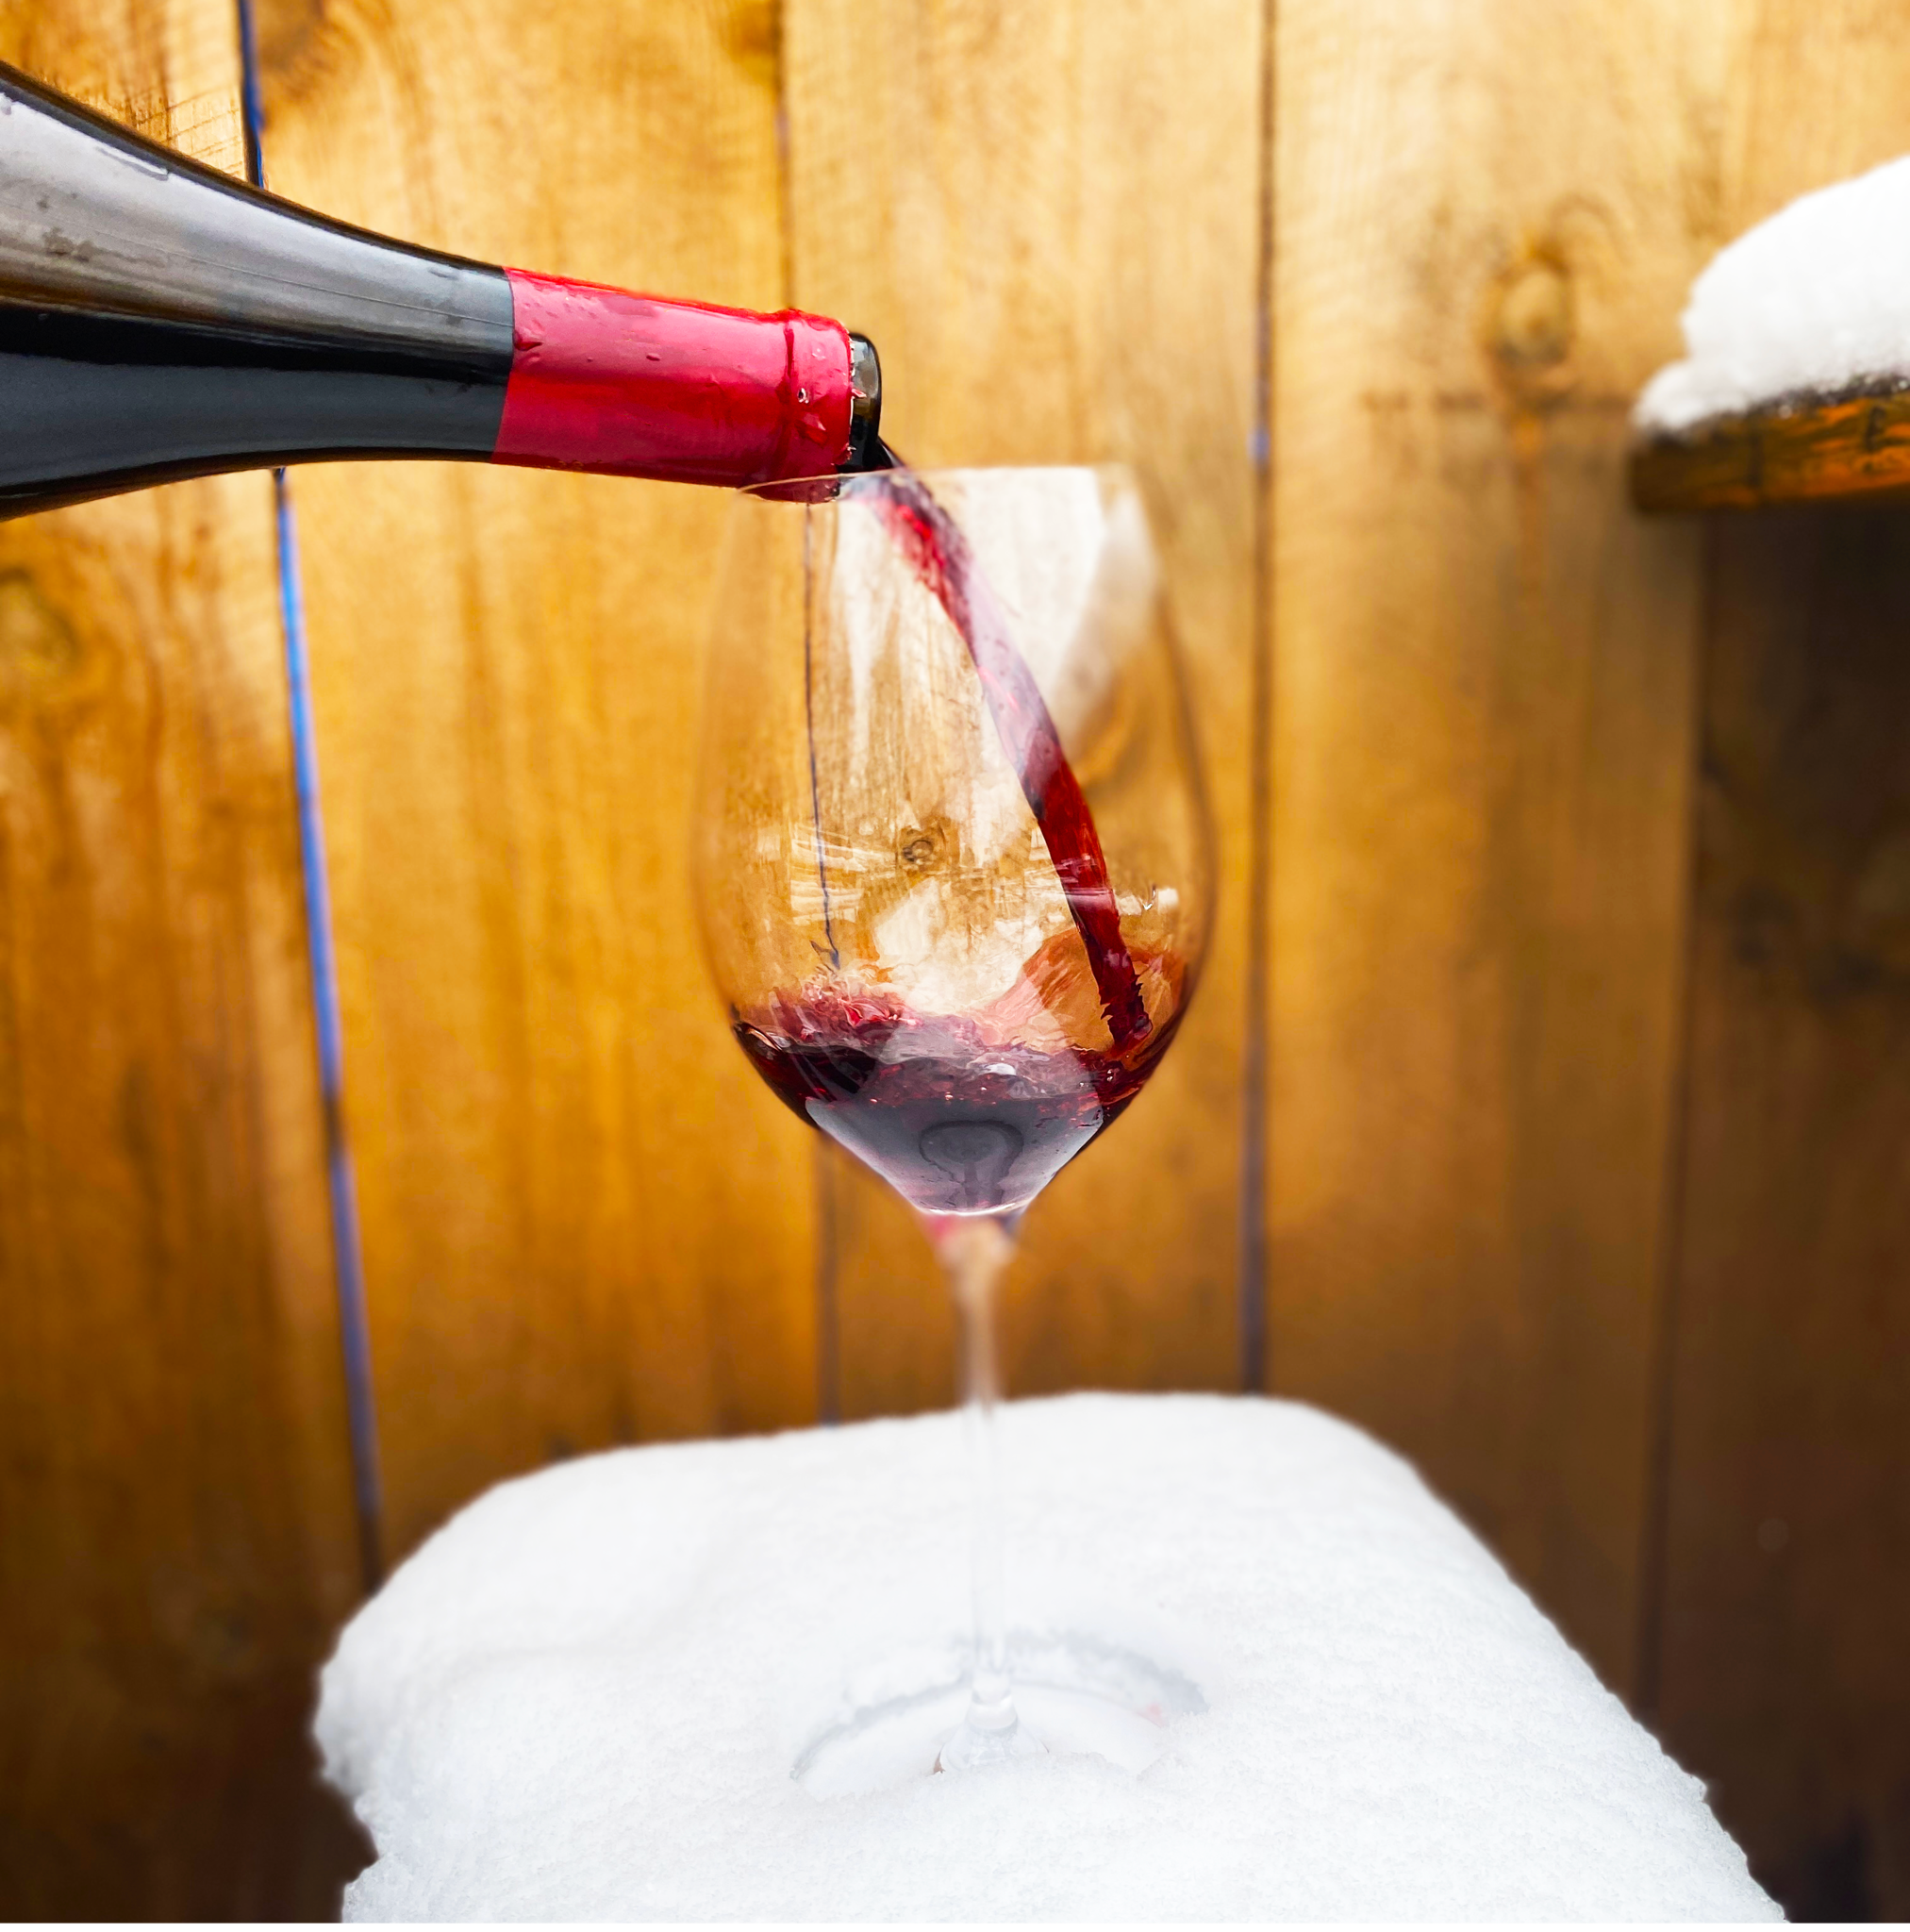 All Your Questions About Beaujolais Nouveau, Answered